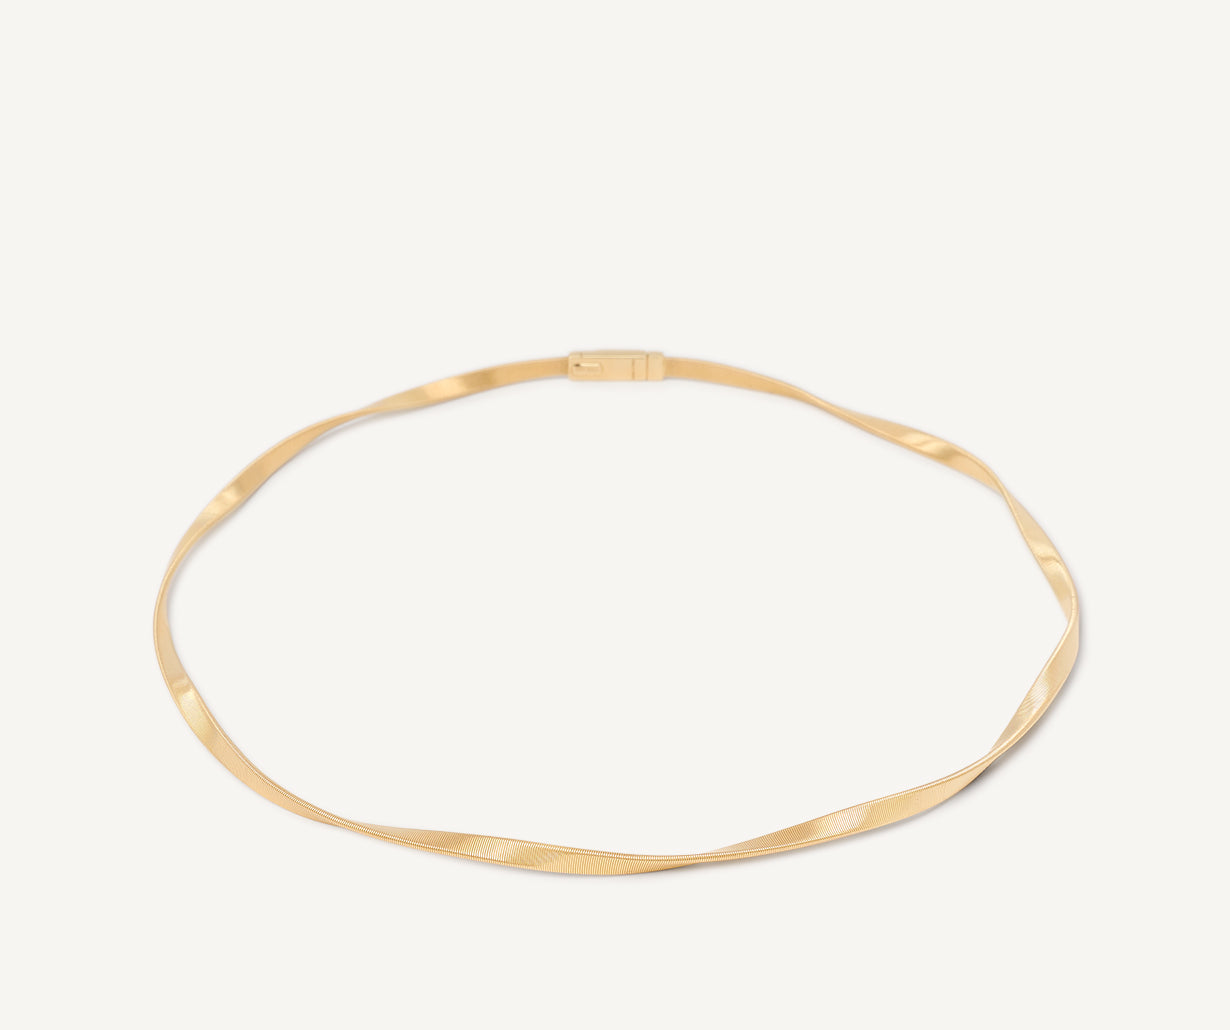 18k yellow gold one strand Marrakech Supreme necklace by Marco Bicego on white background